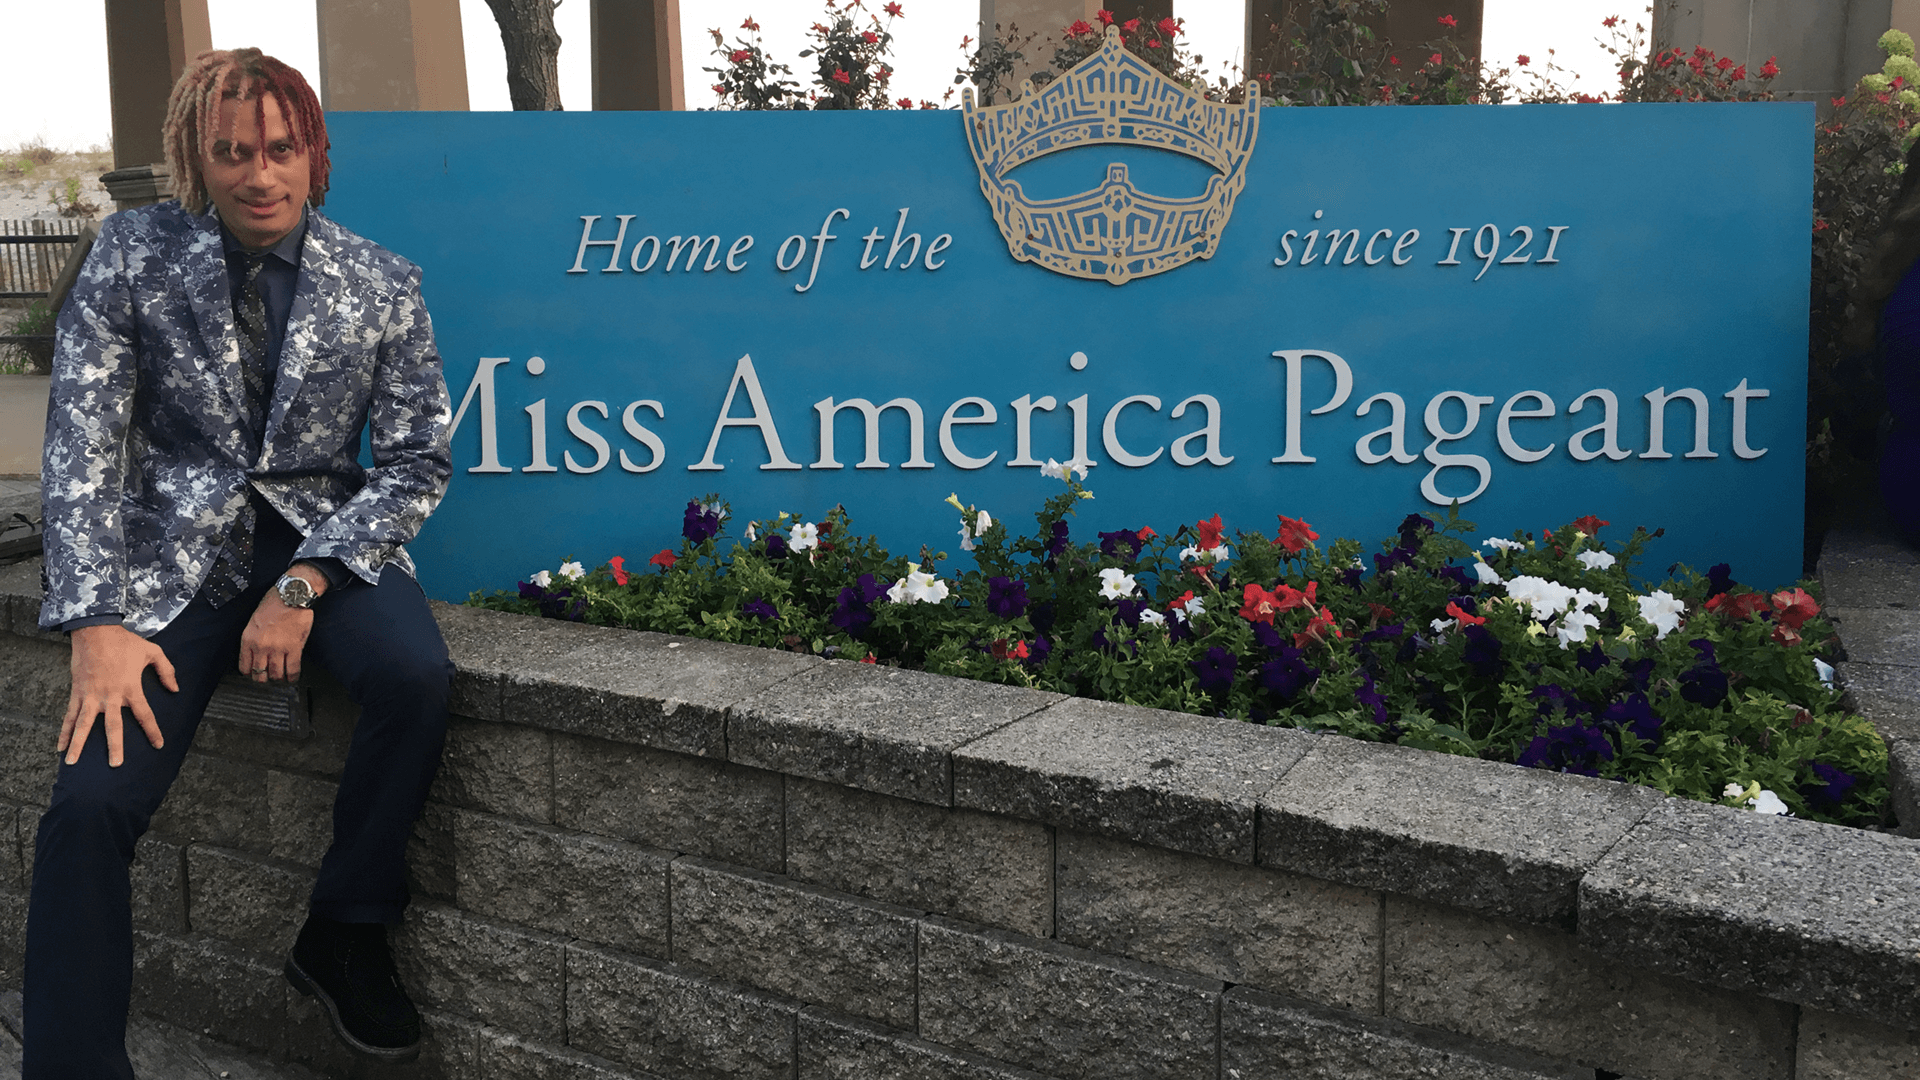 Shefik Named a Judge at Local Miss America Competition